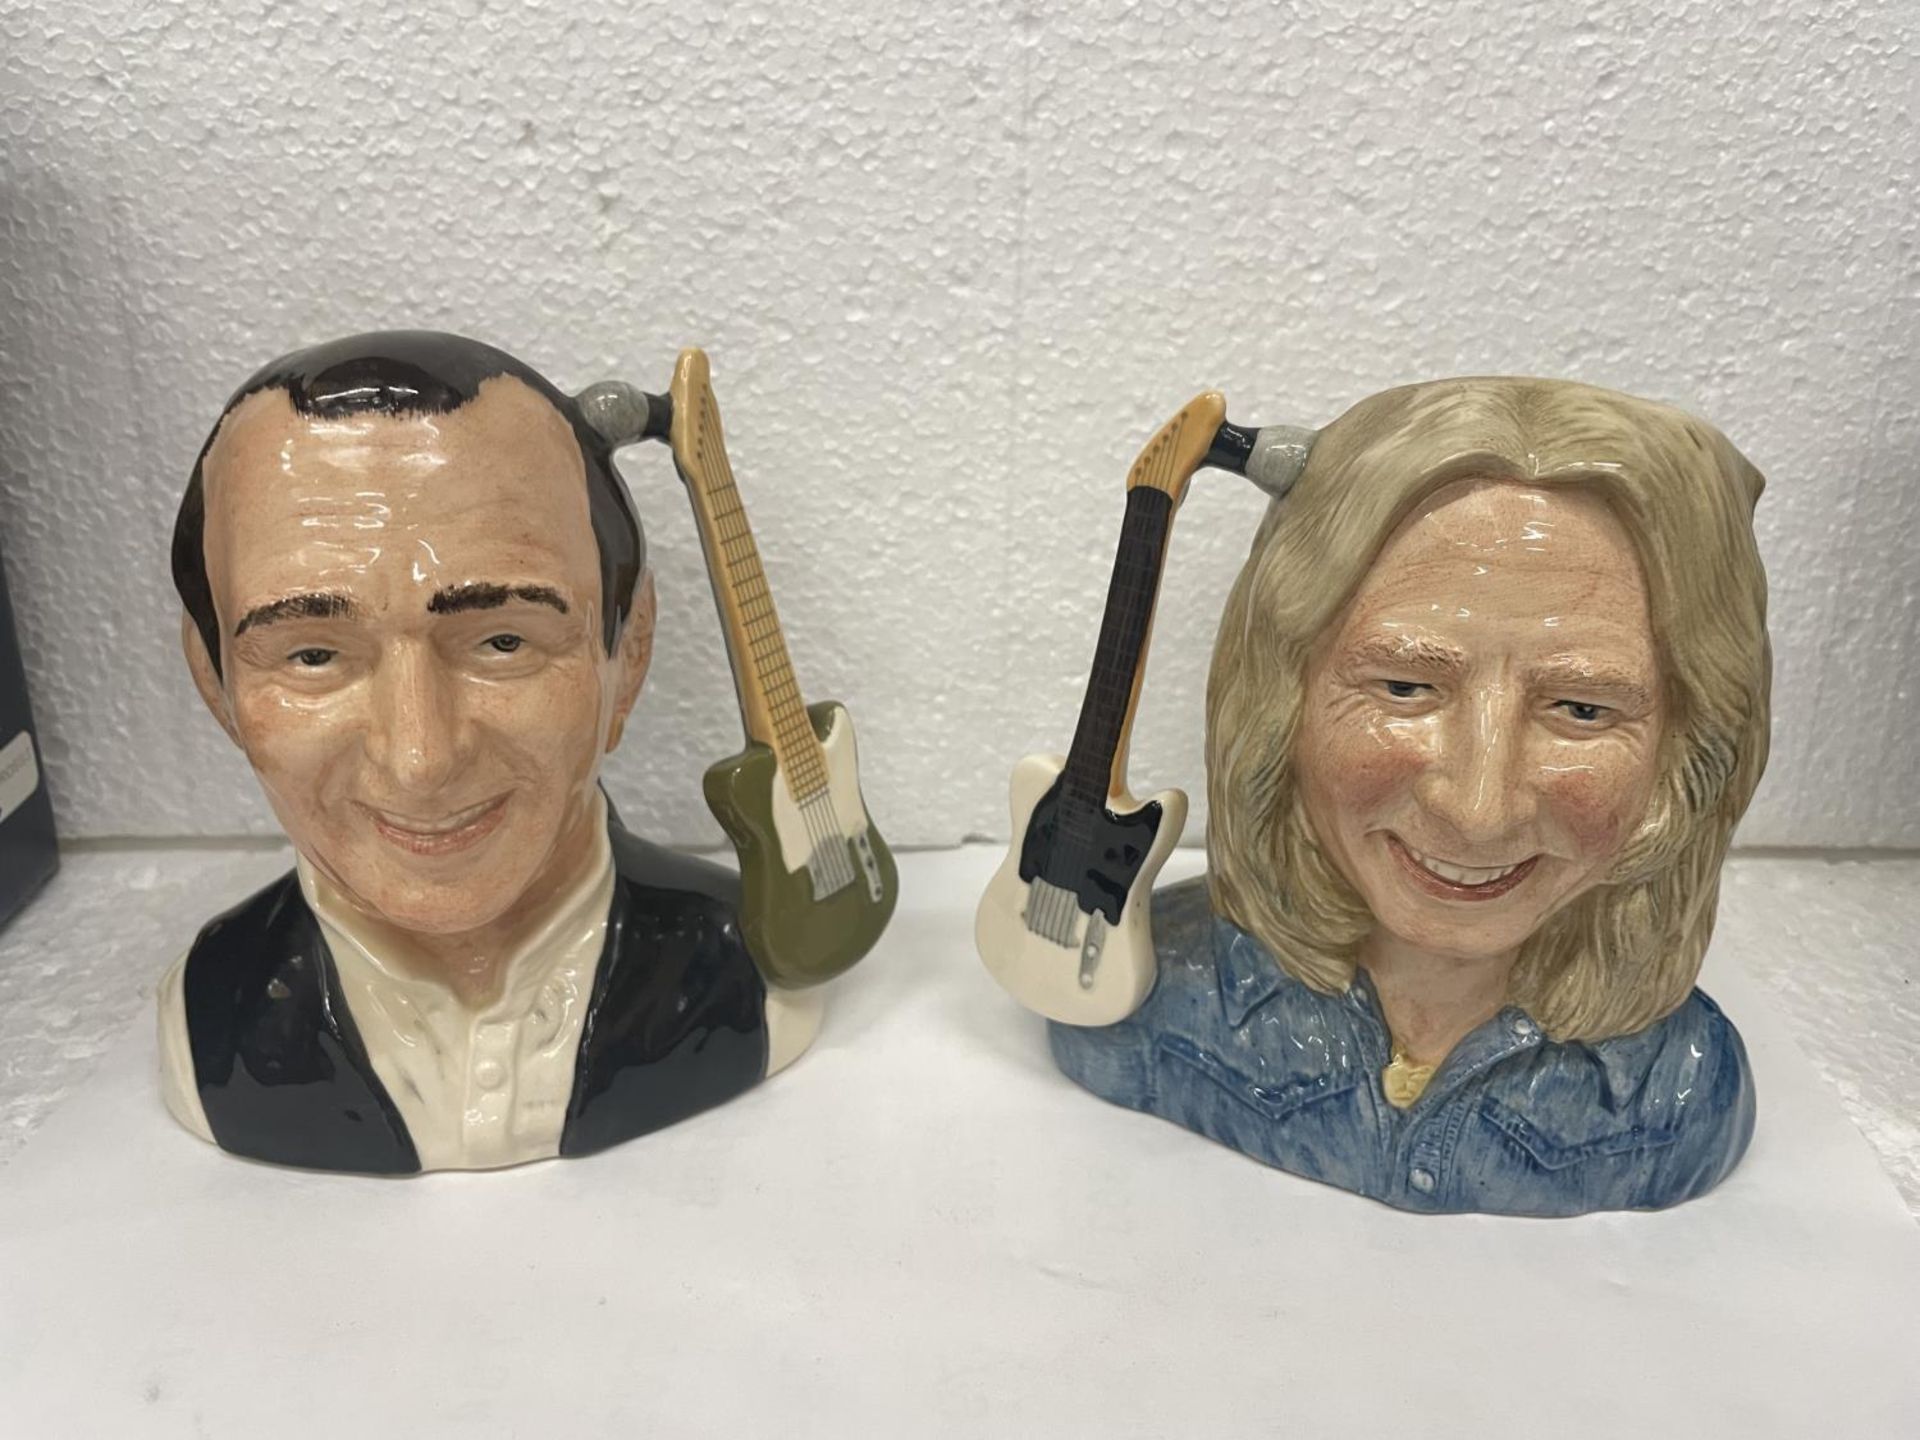 LIMITED EDITION BOXED ROYAL DOULTON STATUS QUO TOBY JUGS SIGNED BY THE MODELLER